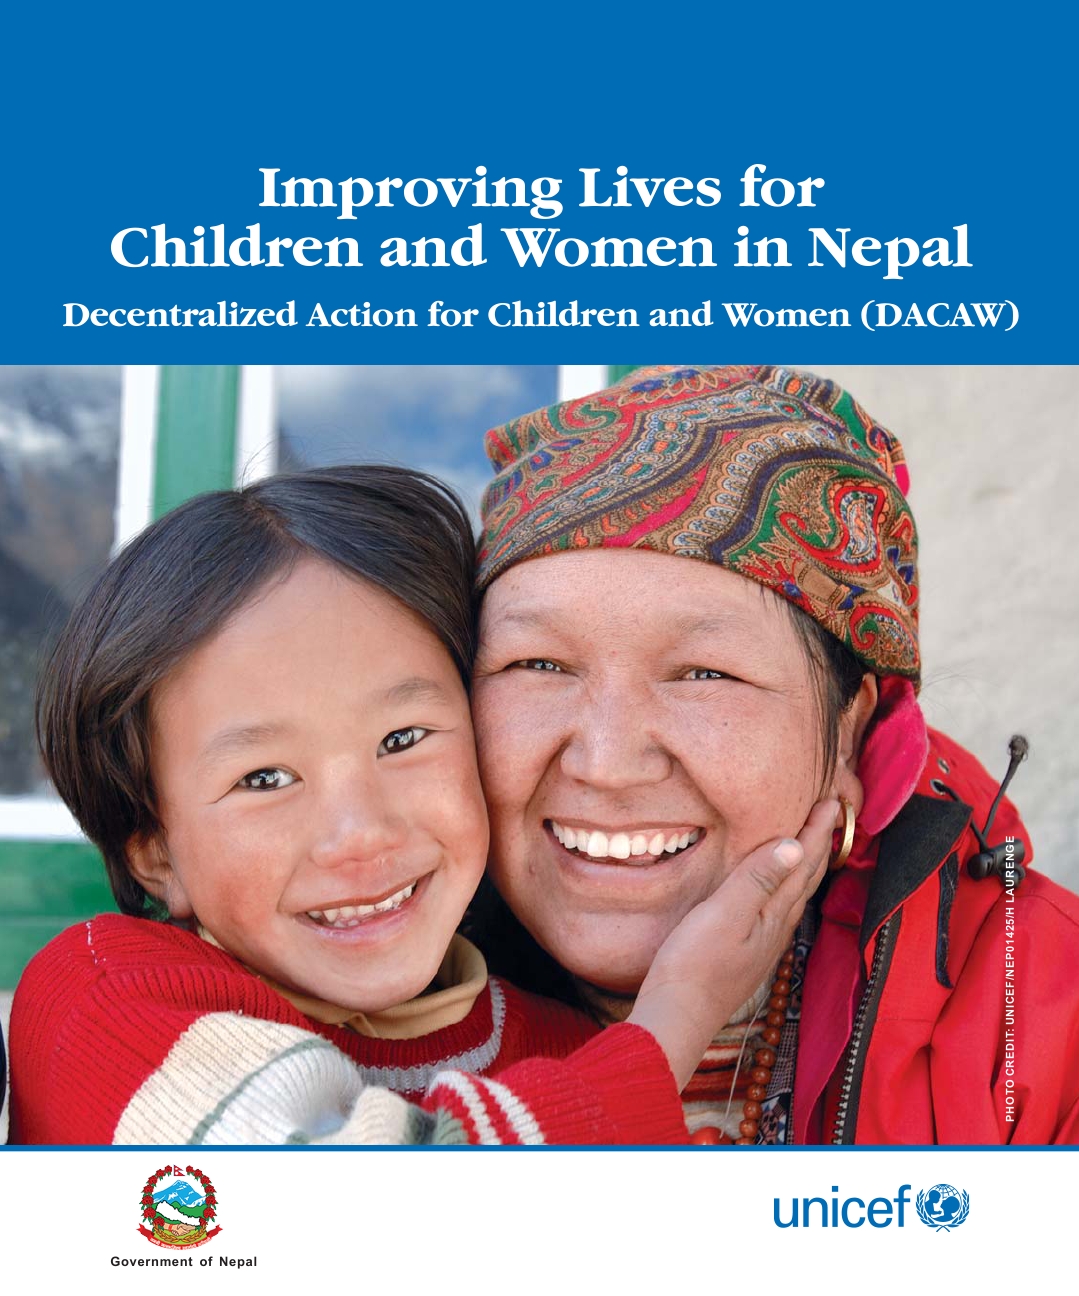 Brochure describing the work of UNICEF's Decentralized Action for Children and Women (DACAW) program, UNICEF Nepal’s primary programme for channelling a range of interventions to rural communities in 23 districts across Nepal.